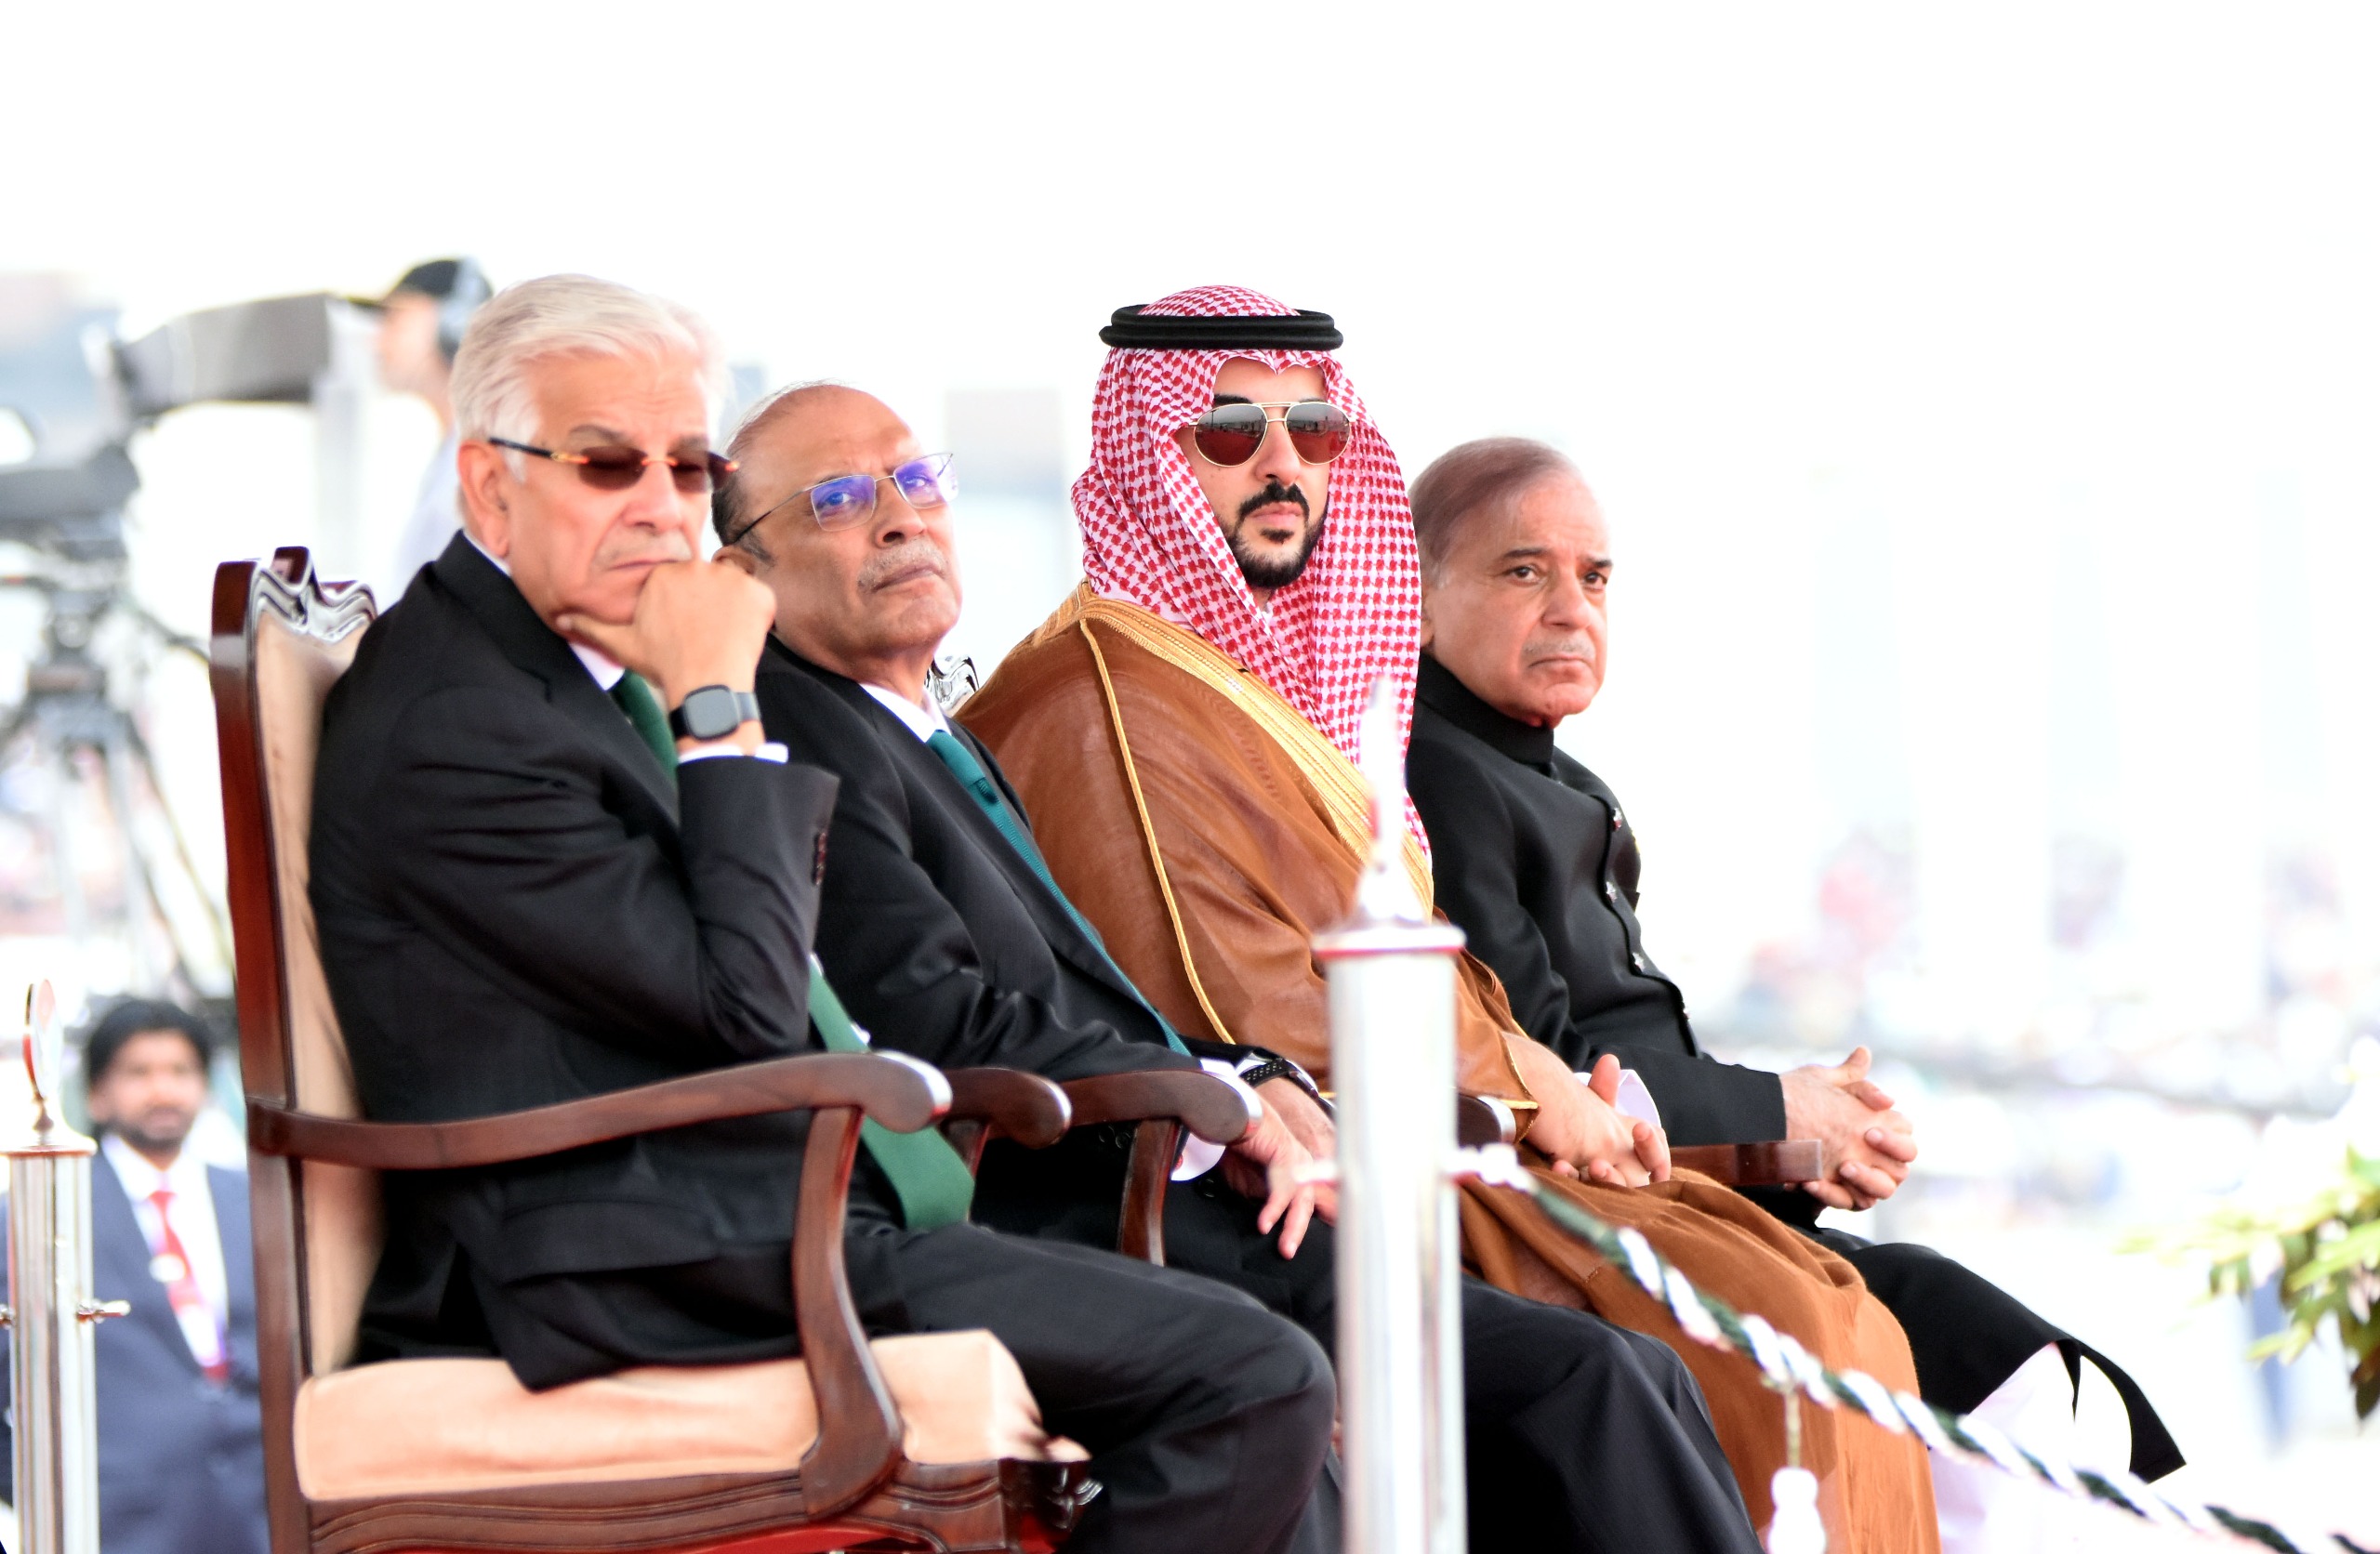 Armed Forces show military prowess witnessed by Saudi Defence Minister and diplomats.